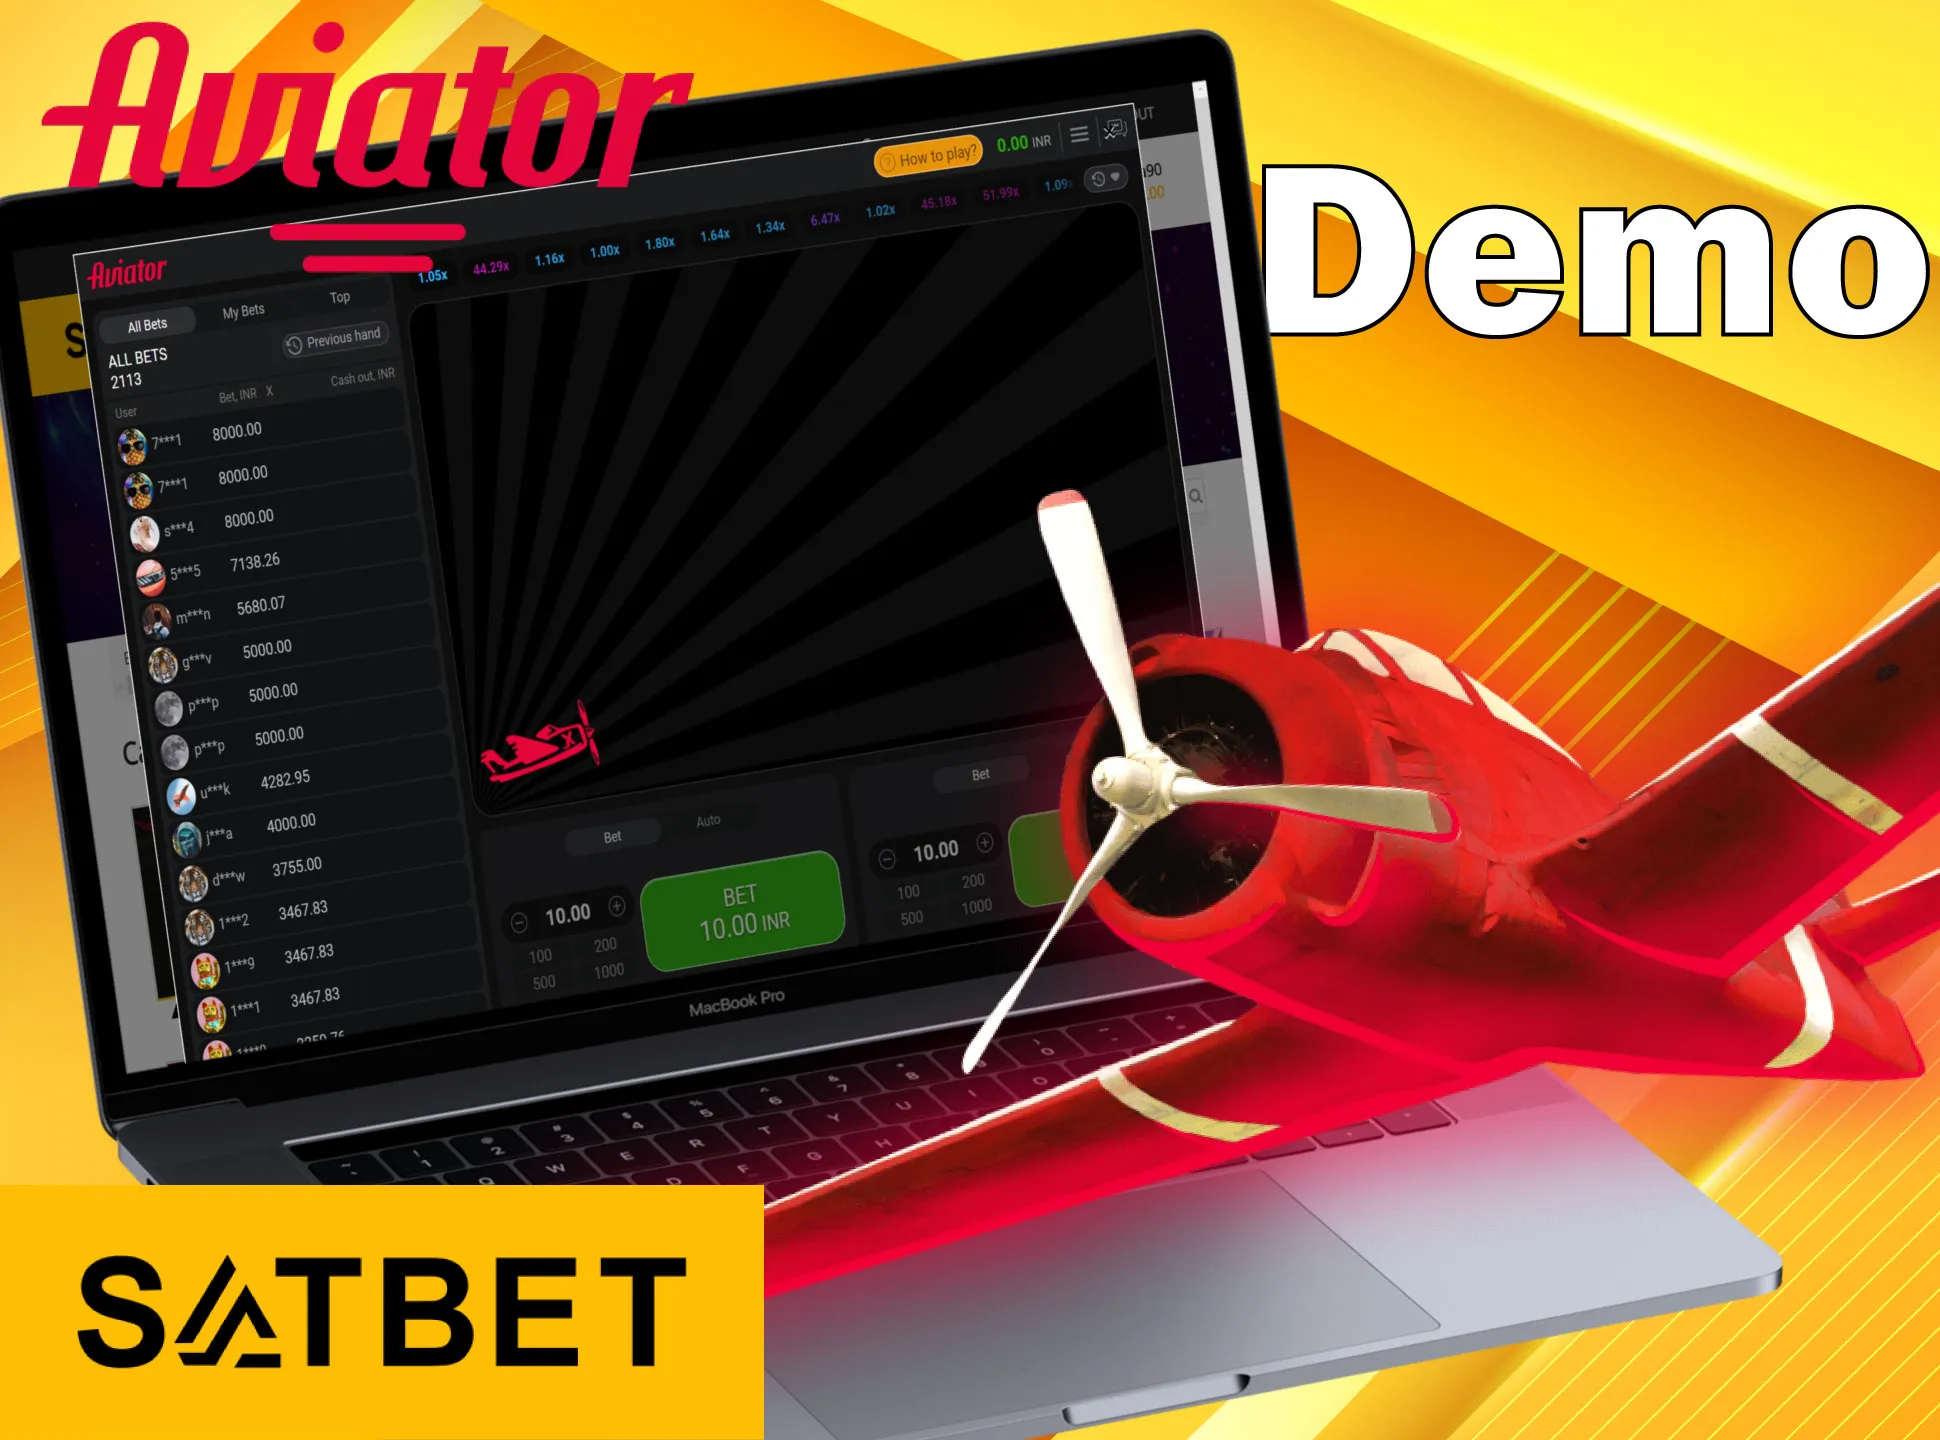 Try a demo version of the Aviator game at the Satbet.